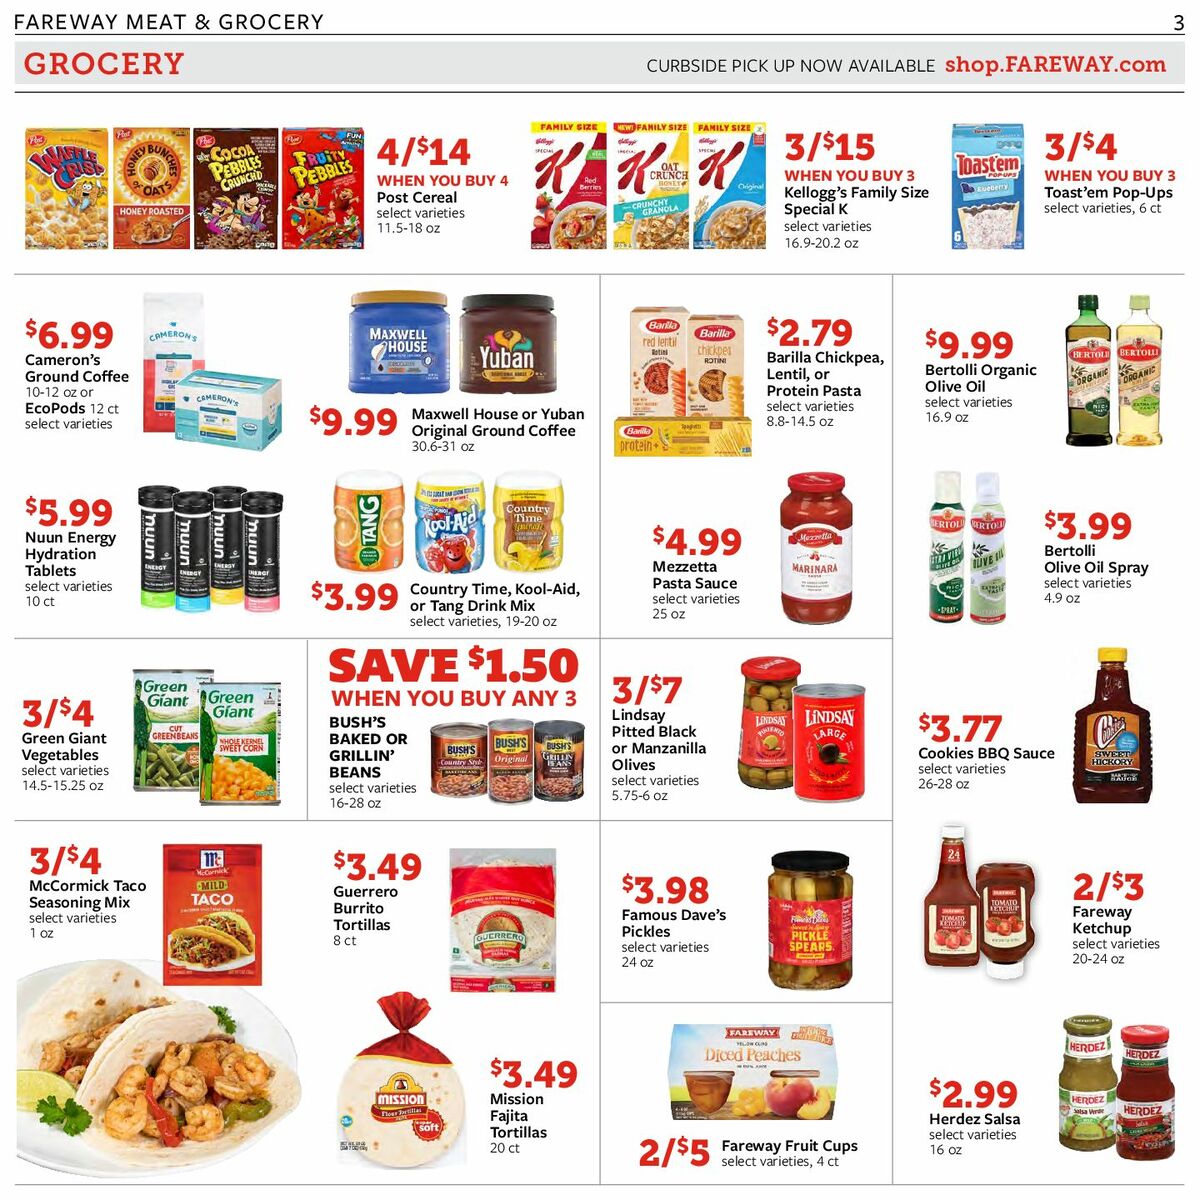 Fareway Weekly Ad from July 17